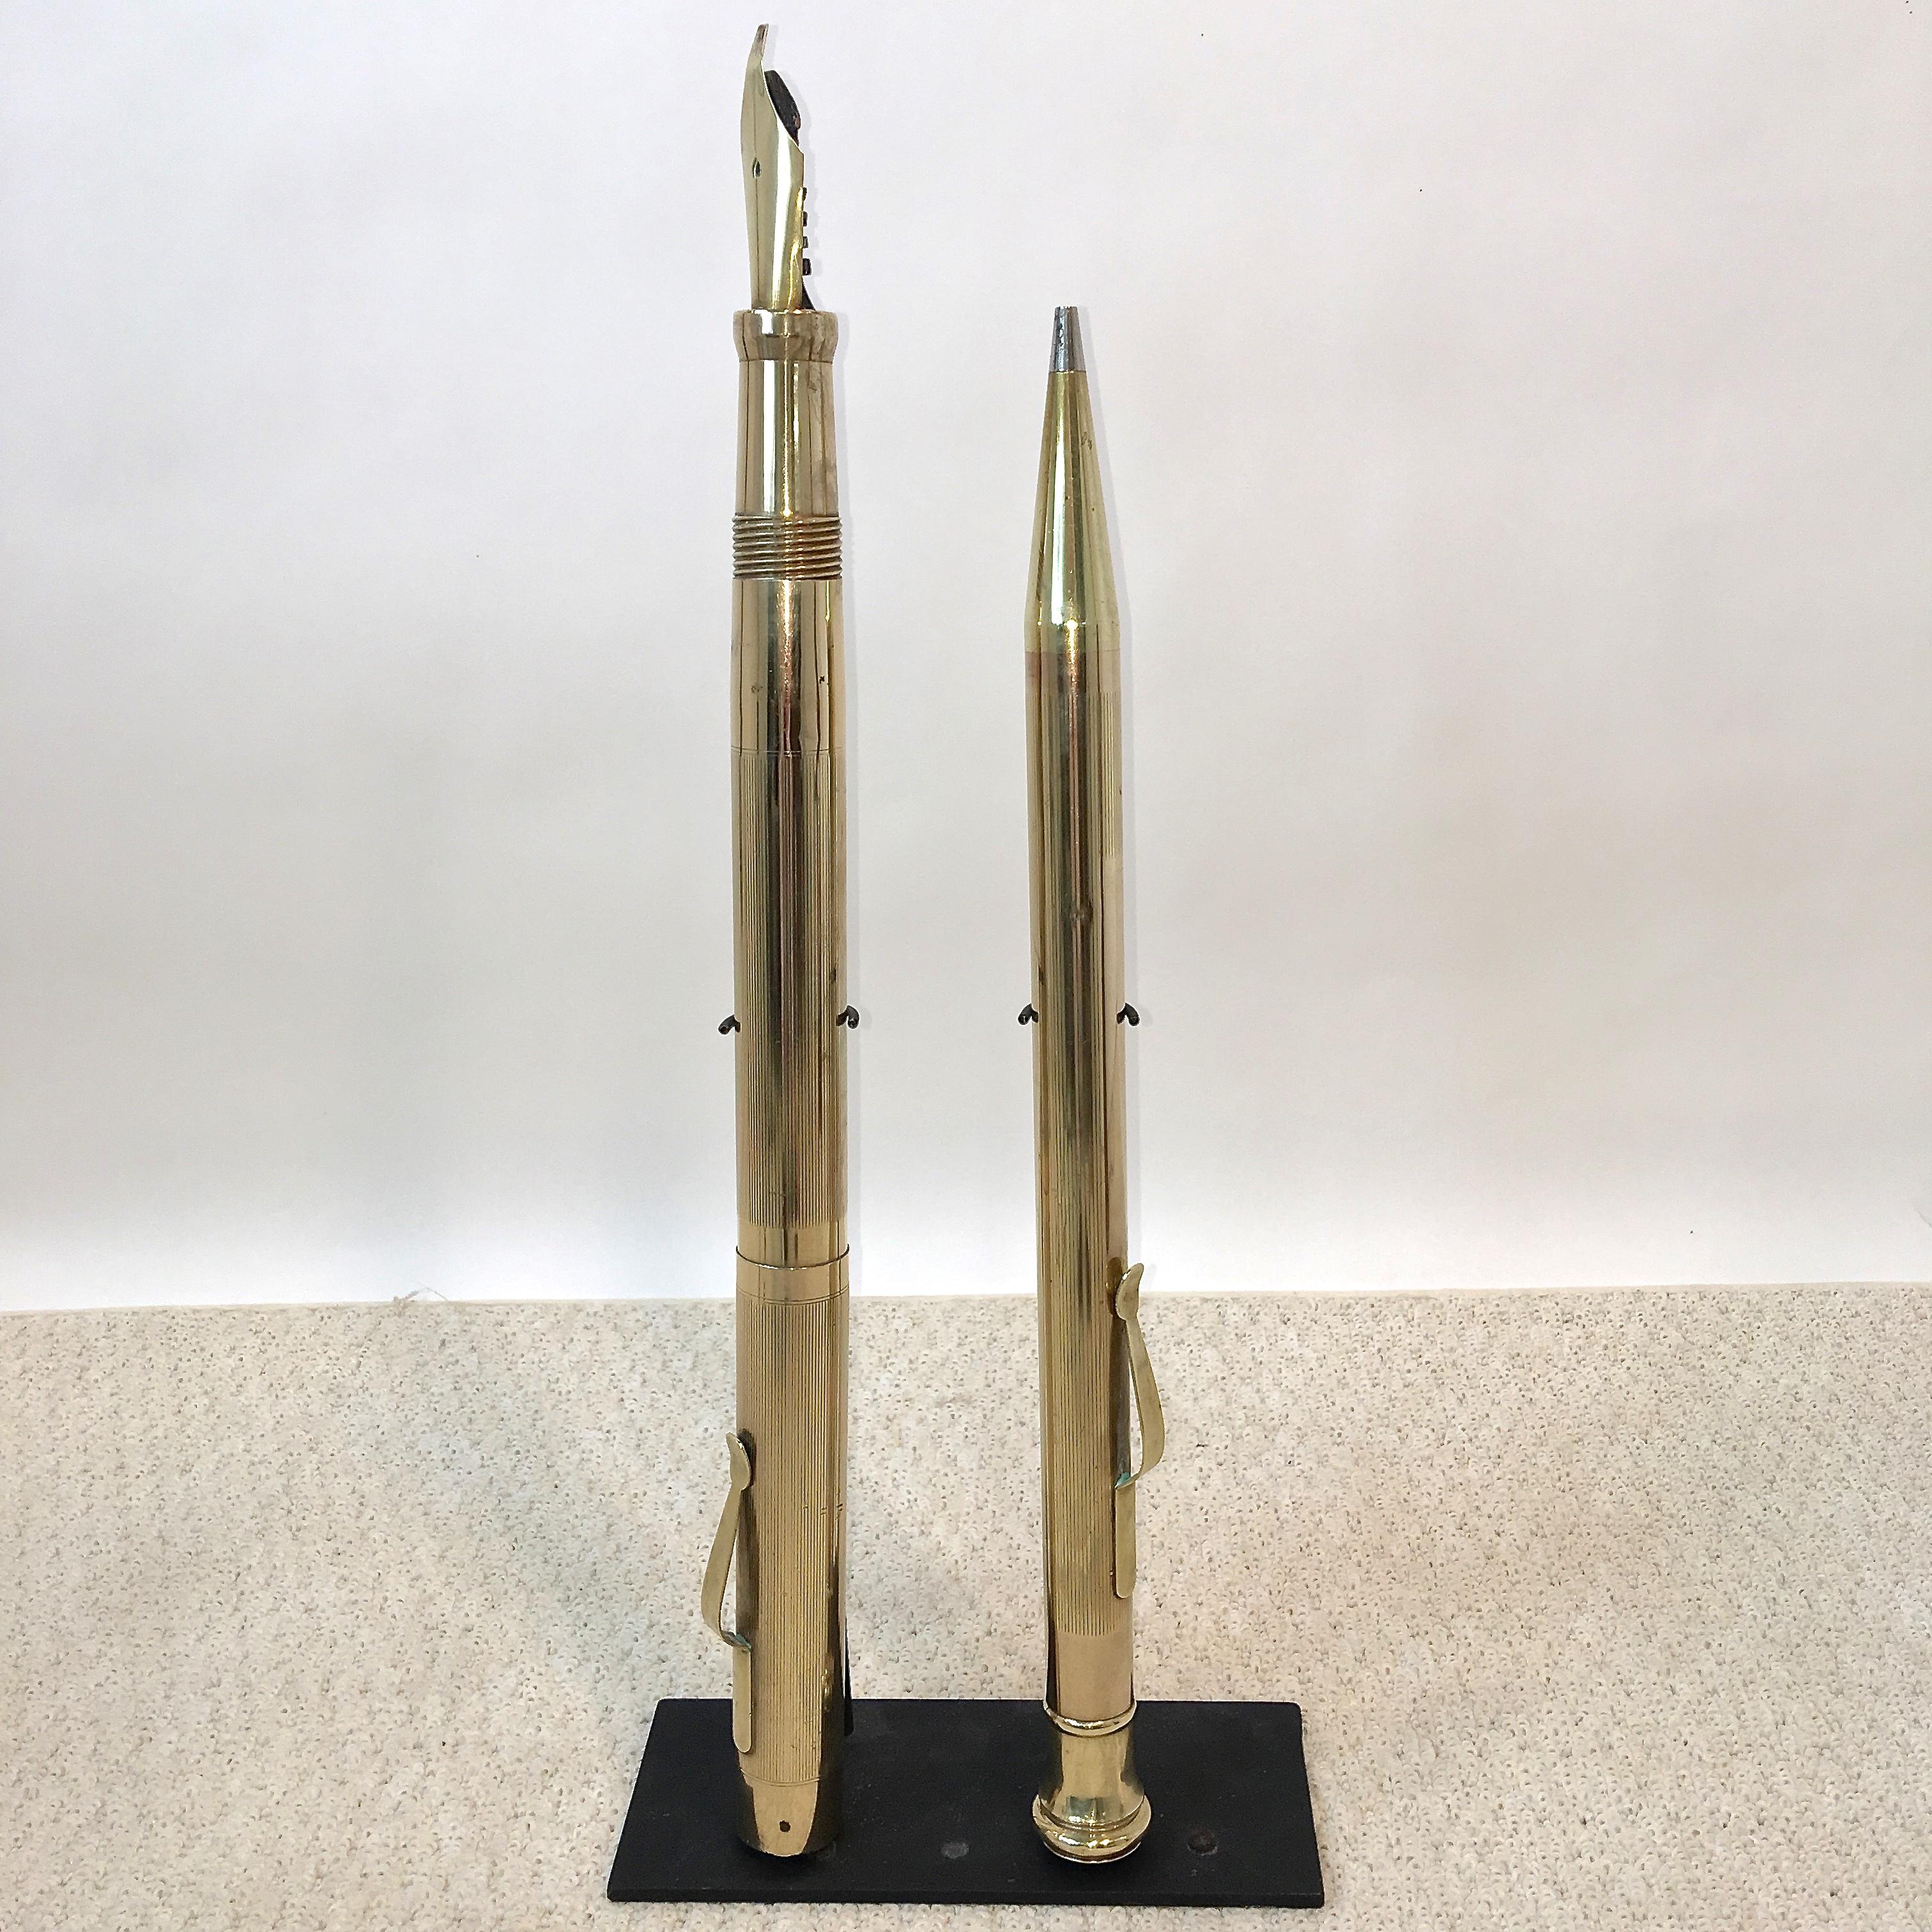 Oversized retail advertising presentation brass fountain pen and mechanical pencil display signs from the early 1920s when they would have been featured within a wood and glass display cabinet at the pen counter of a stationary store. 

Originally